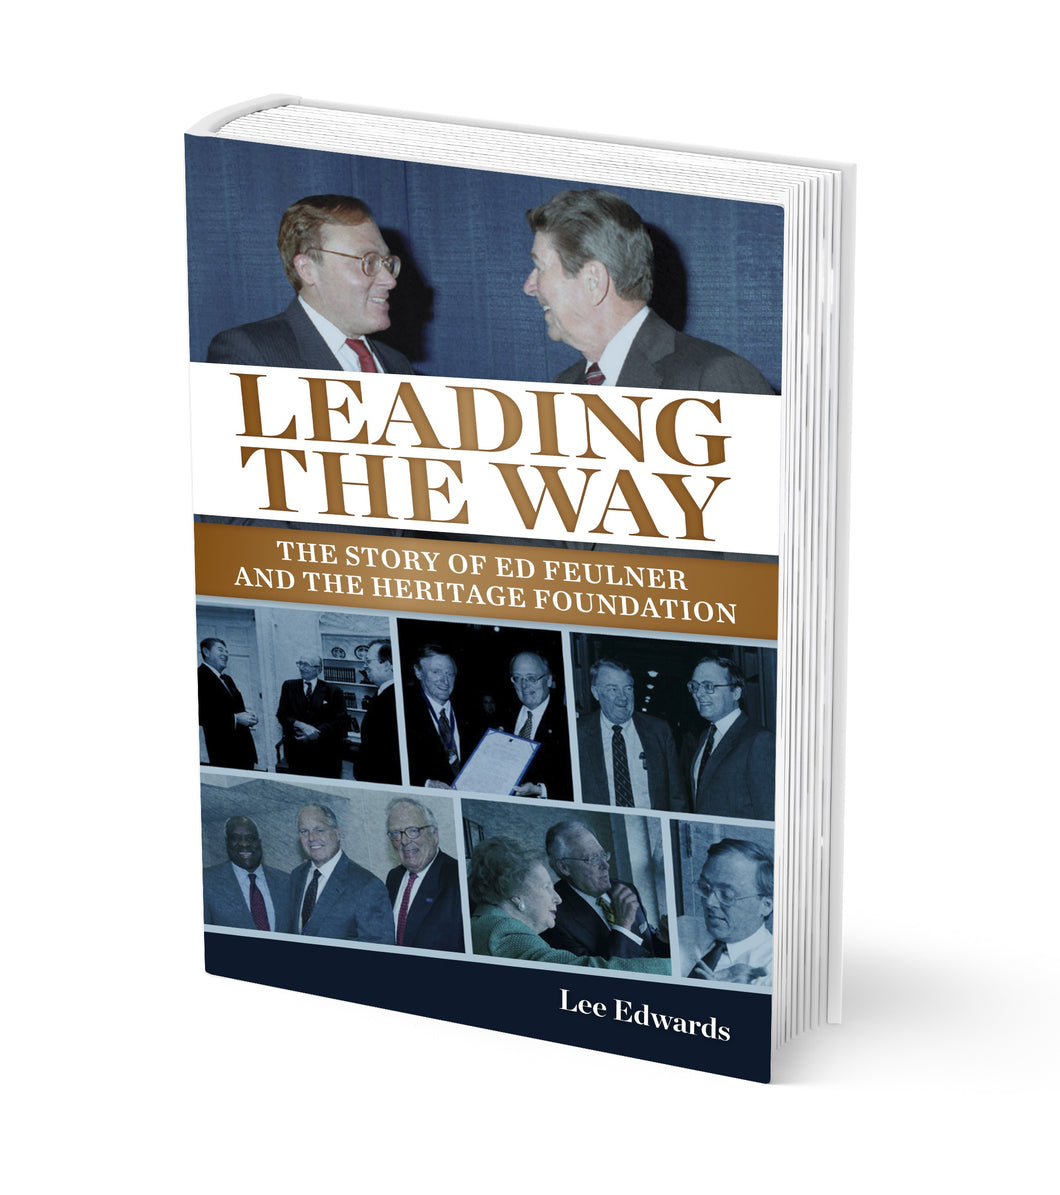 Leading the Way: The Story of Ed Feulner and The Heritage Foundation